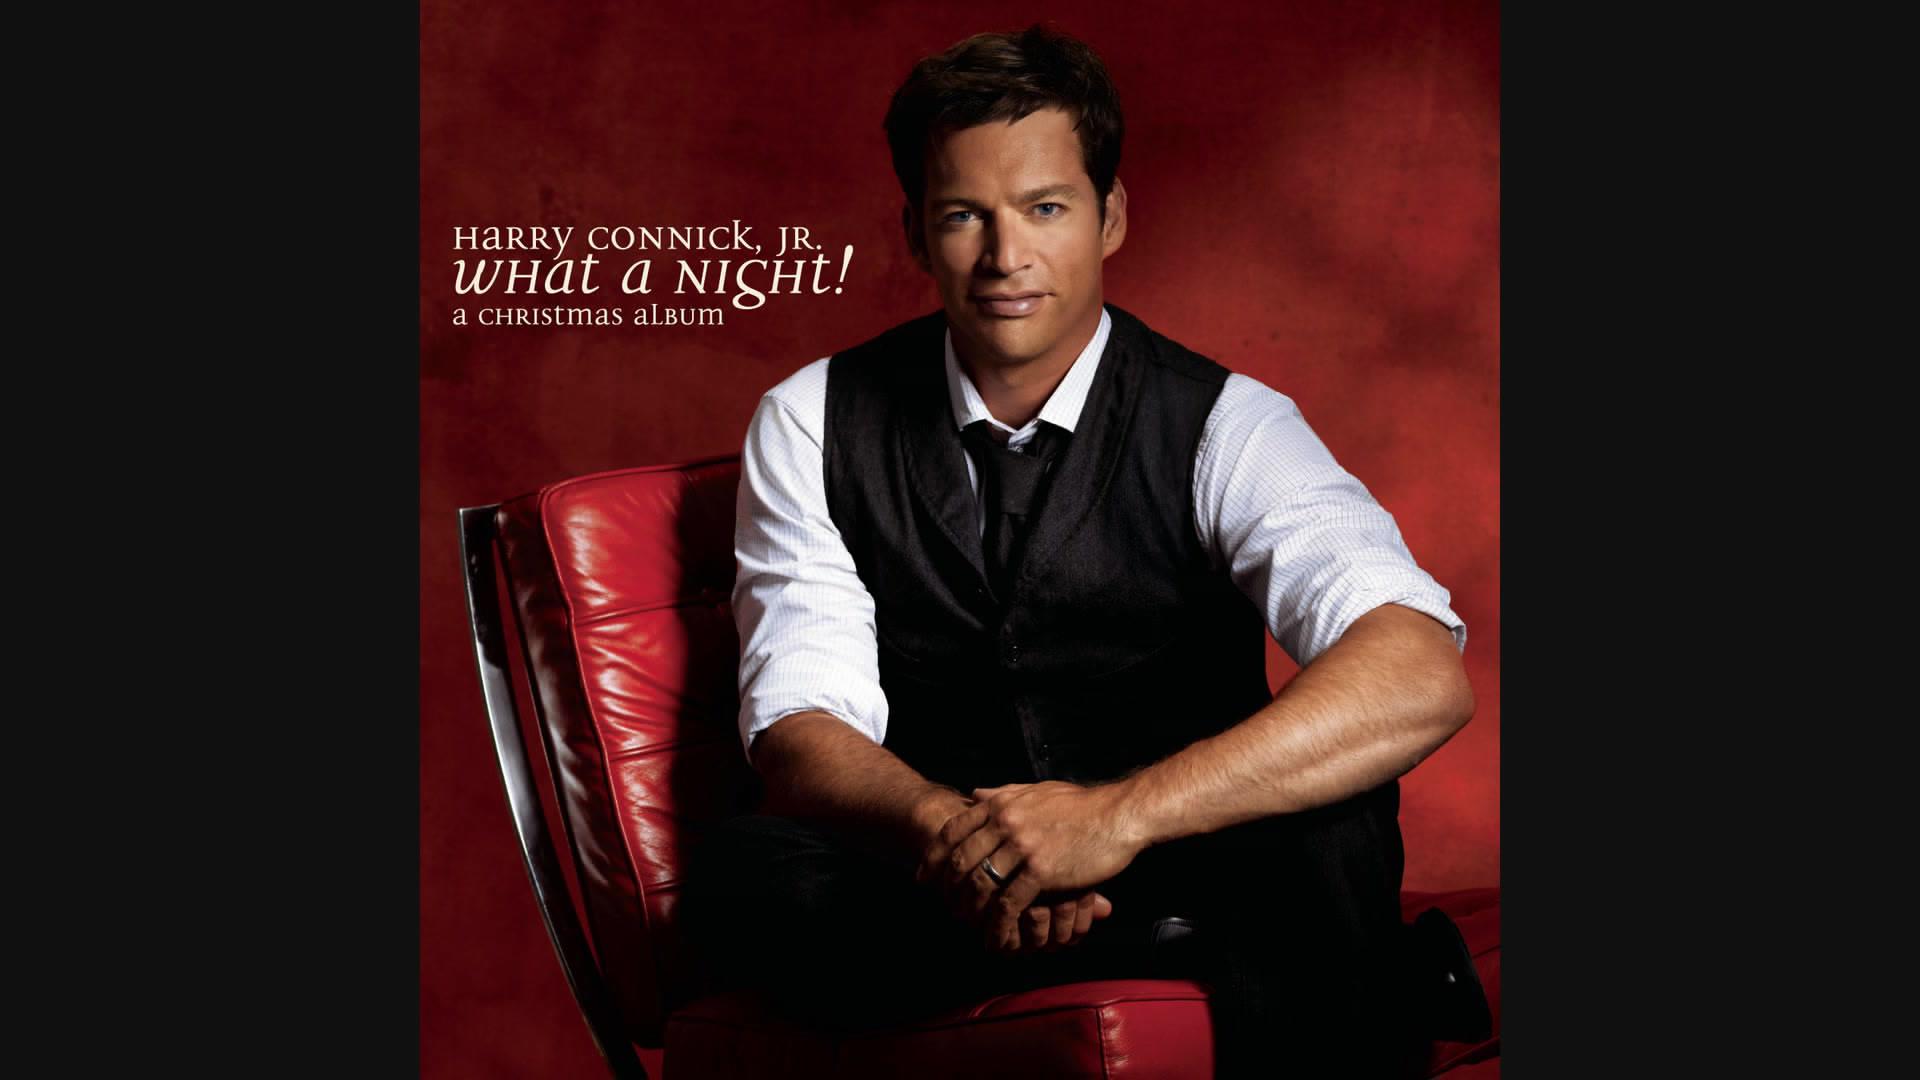 Harry Connick, Jr. - It's Beginning To Look a Lot Like Christmas (Audio)